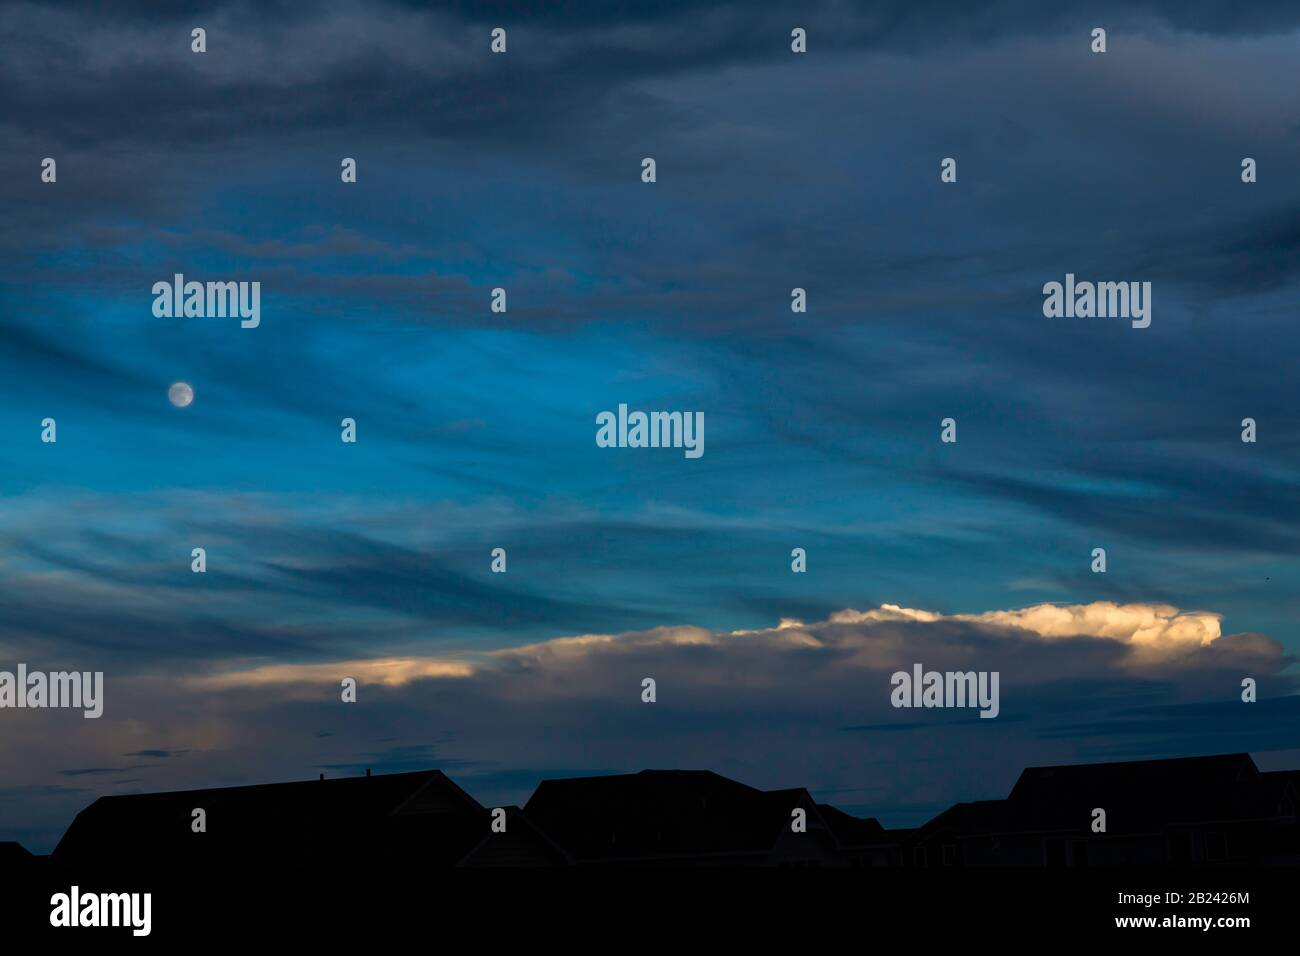 Nightscape, with layered blue sky, moon, bright cloud stripe and silhouettes Stock Photo